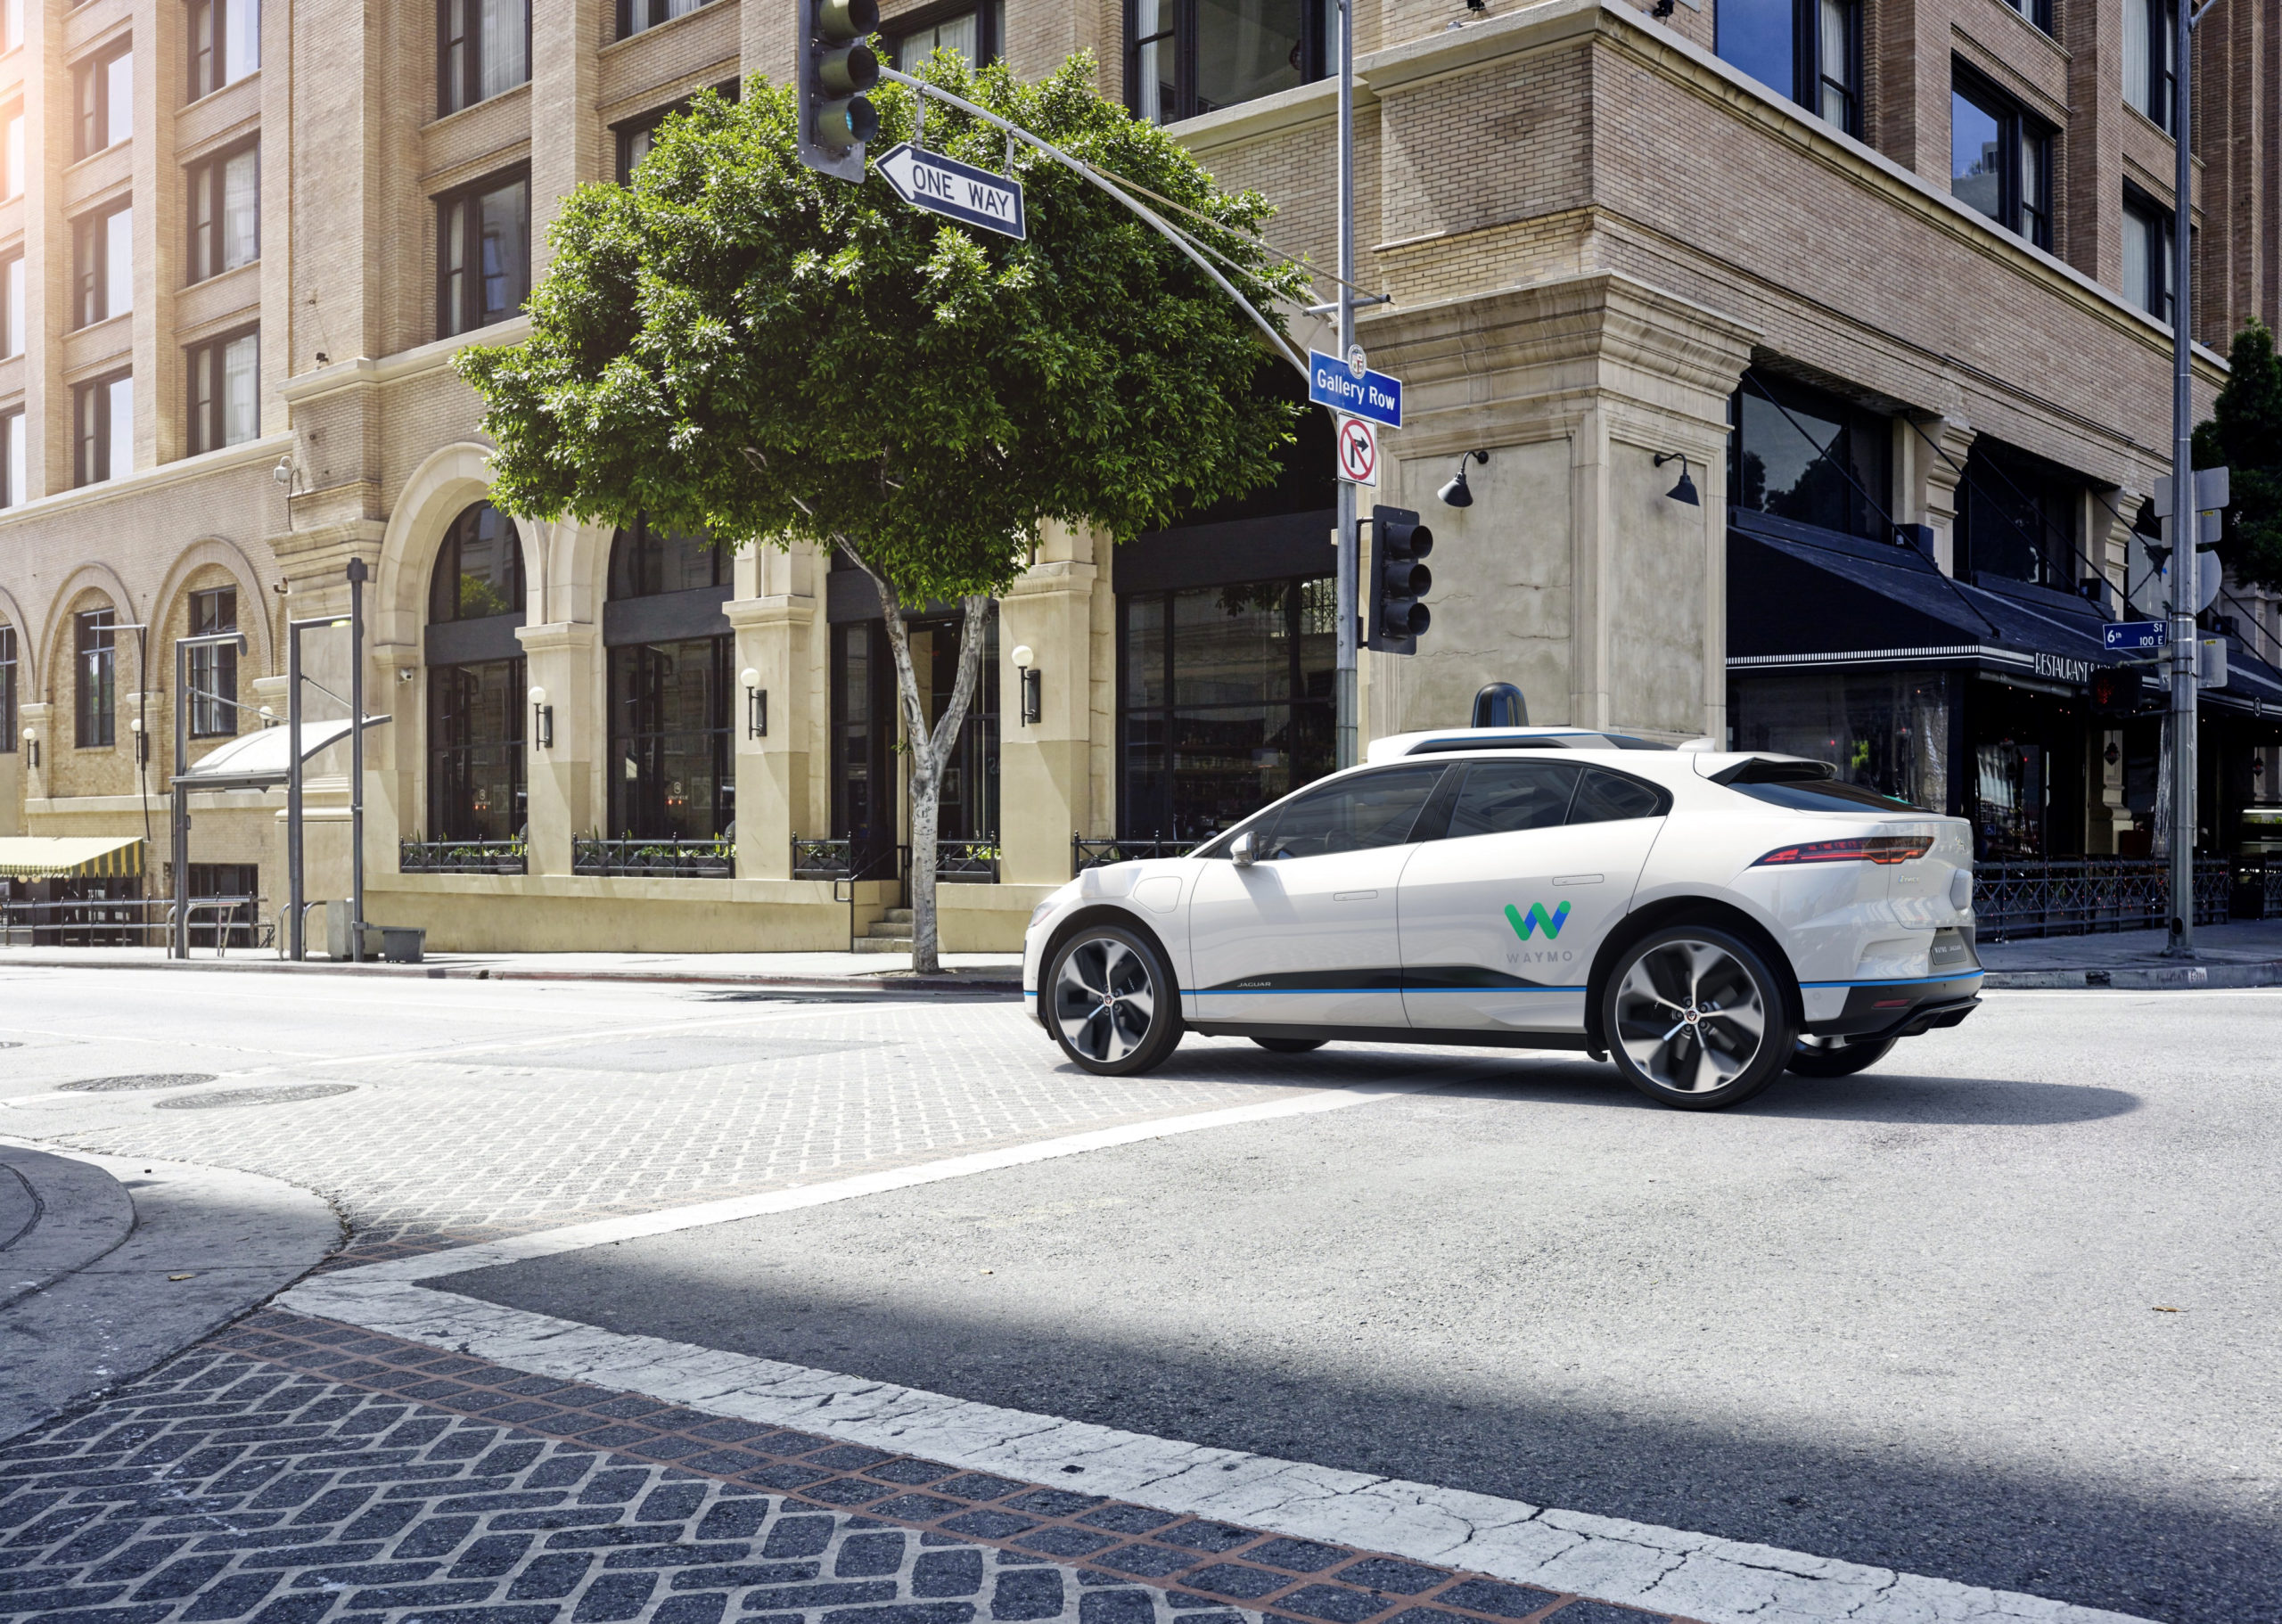 Here Is the First Look Inside Waymo’s Self-Driving Jaguar I-Pace